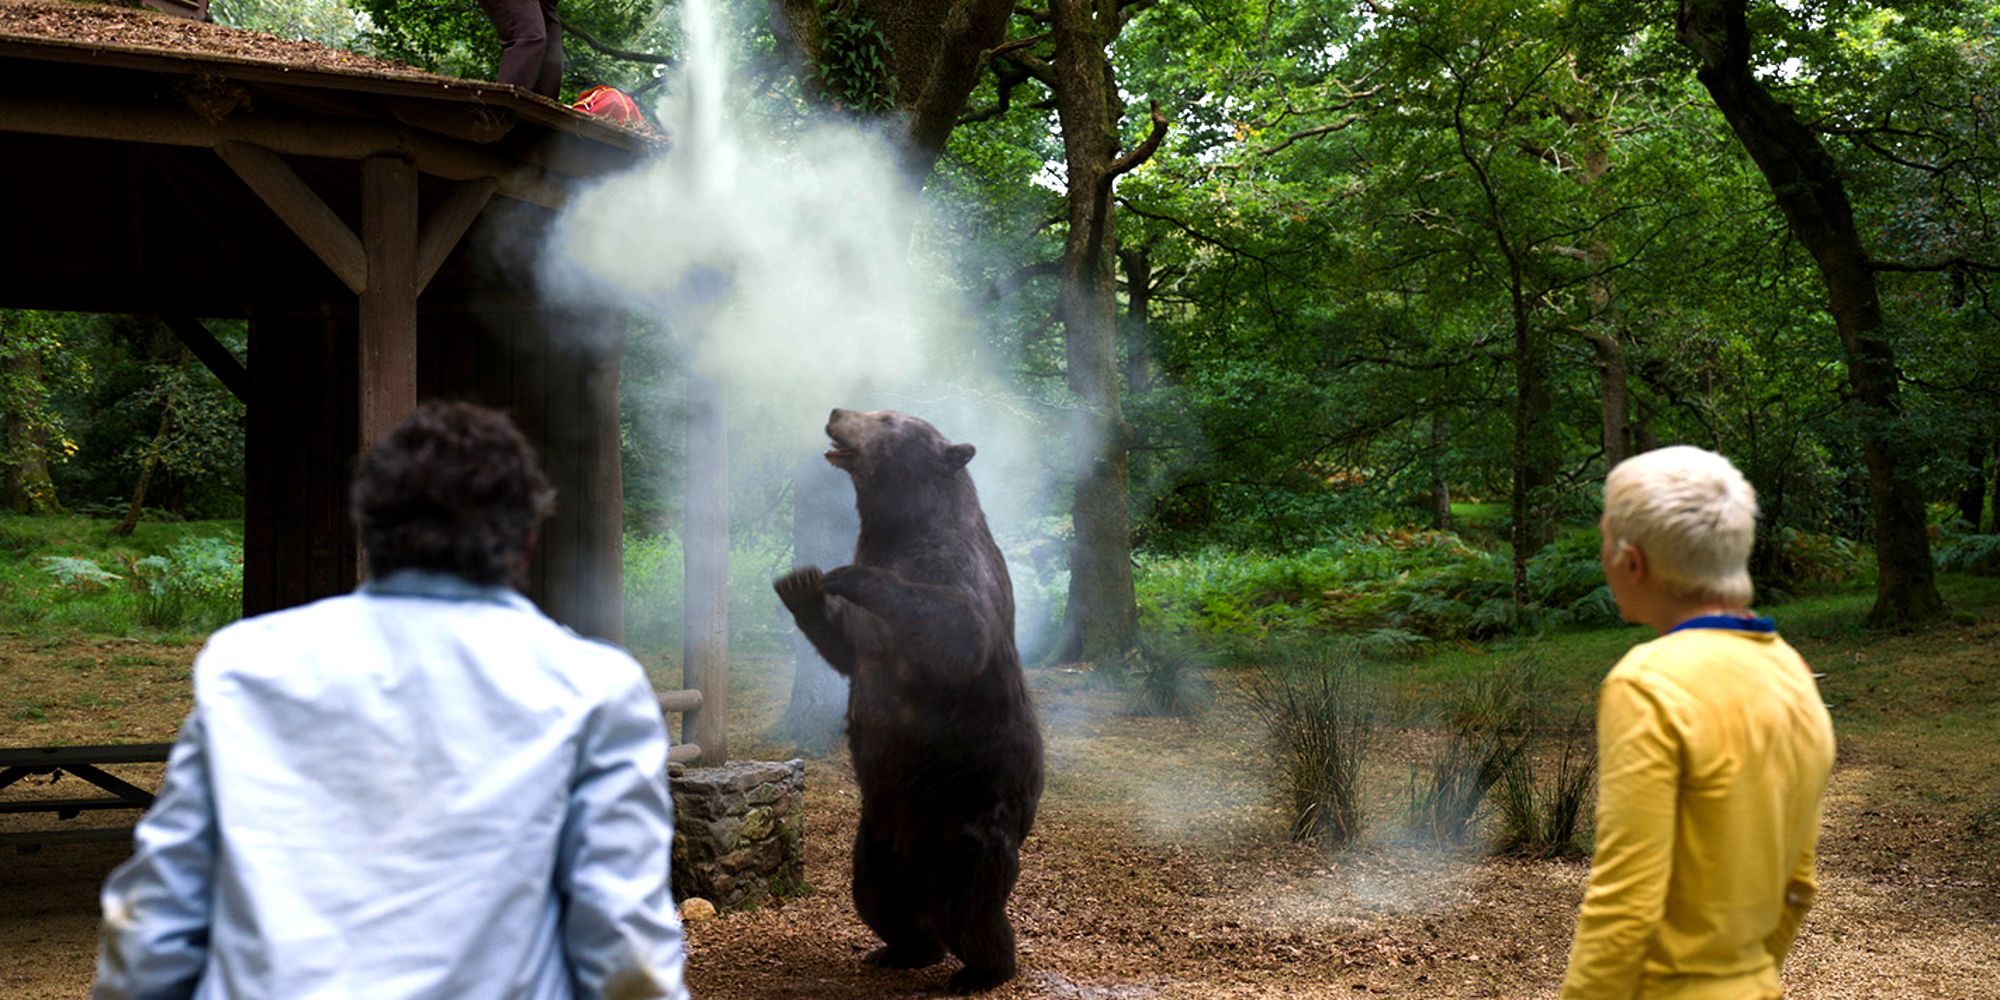 cocaine bear ingesting the drug in the air